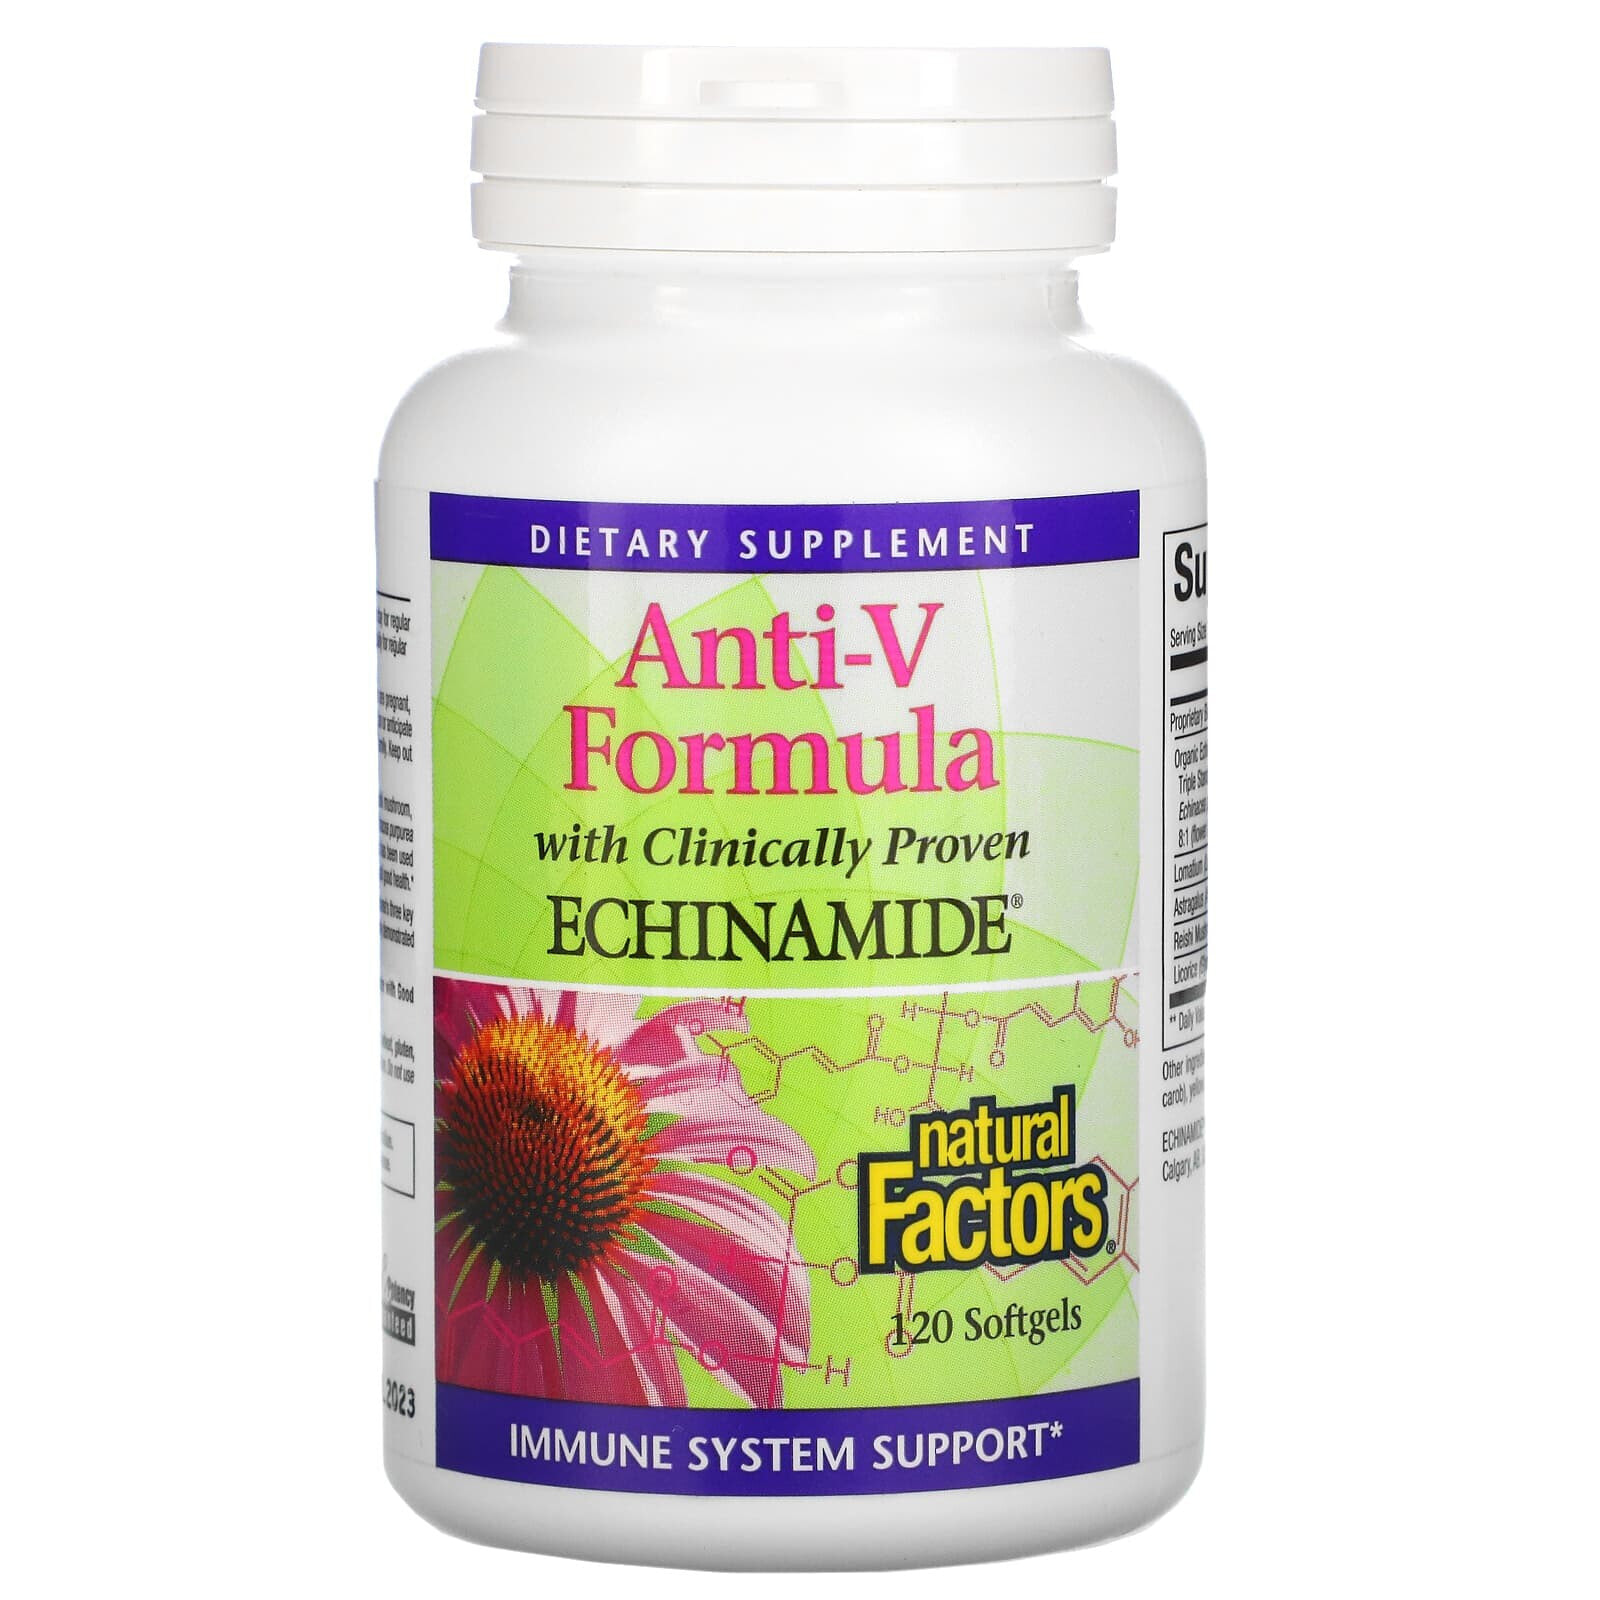 Anti-V Formula, with Clinically Proven Echinamide, 60 Softgels